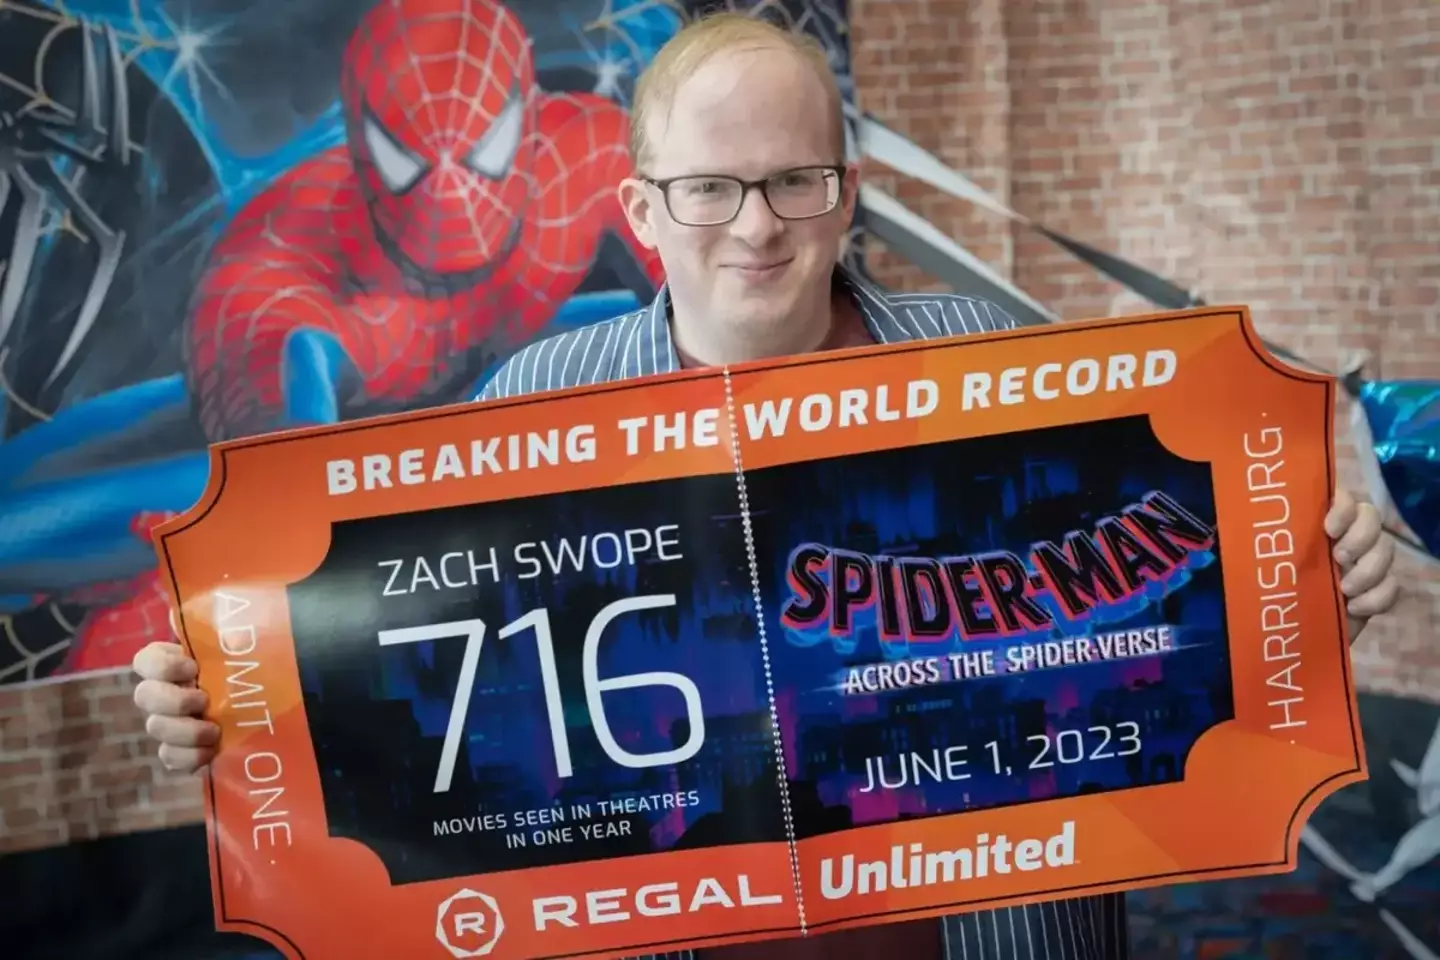 Zach broke the previous record of 715 when he watched Spiderman: Across the Spiderverse.